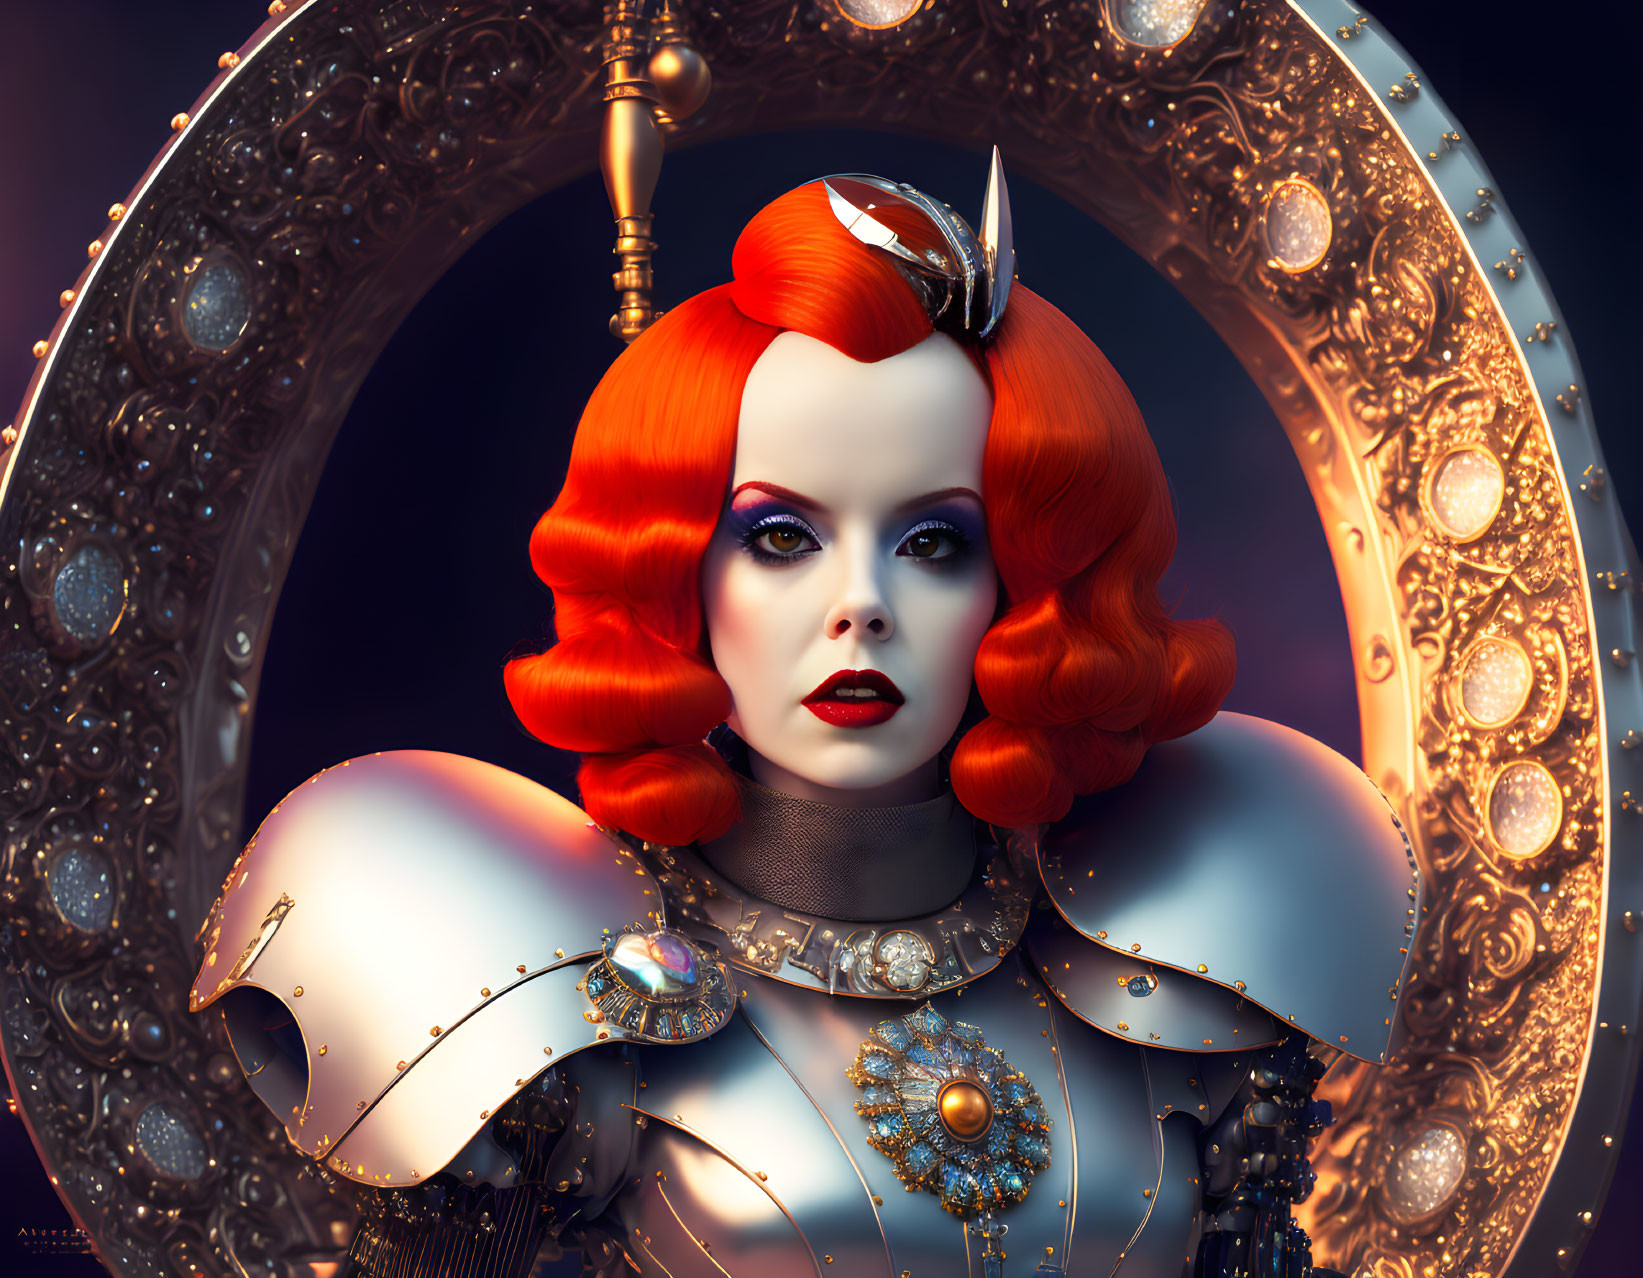 Stylized digital artwork of woman with red hair in futuristic outfit framed by ornate mirror